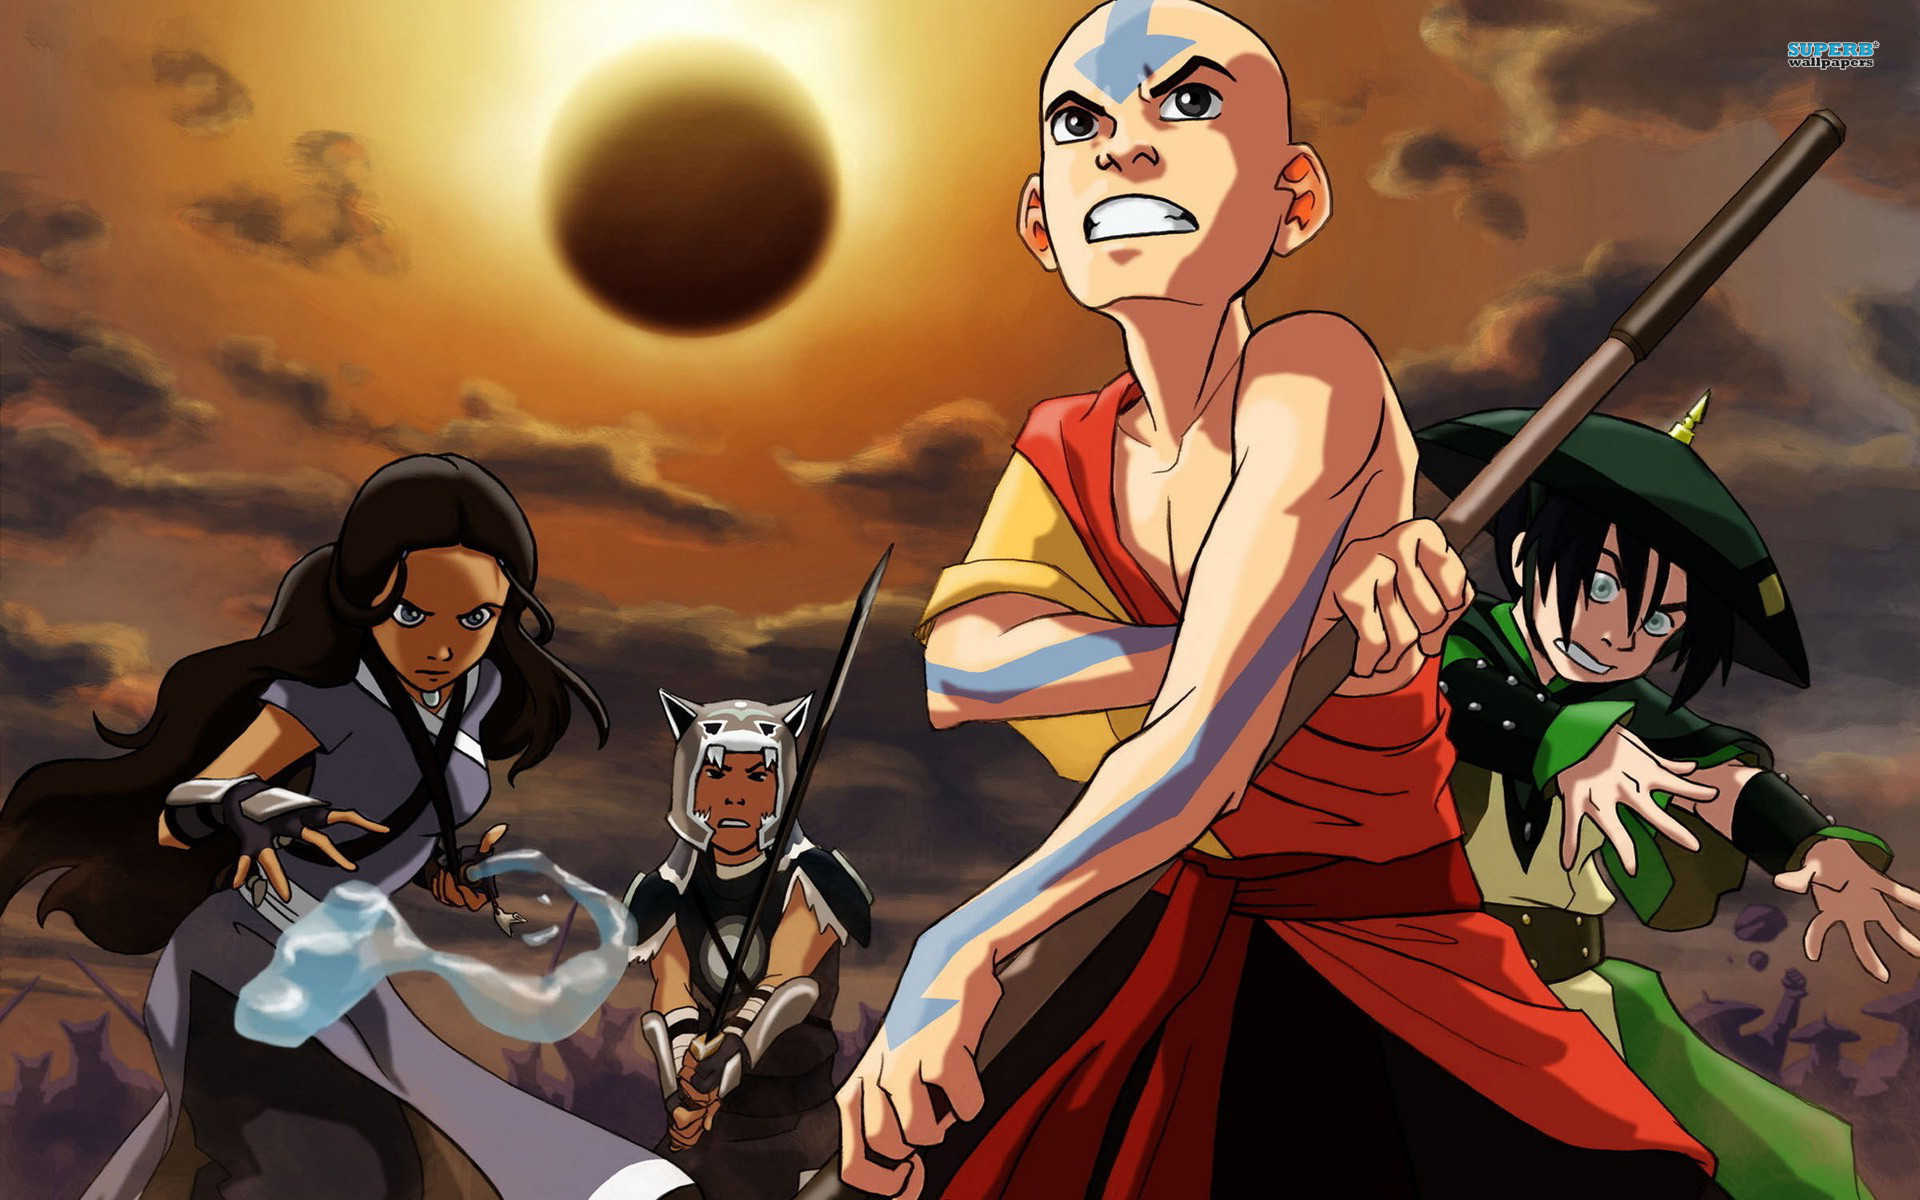 Avatar the Last Airbender Wallpapers (71+ images)